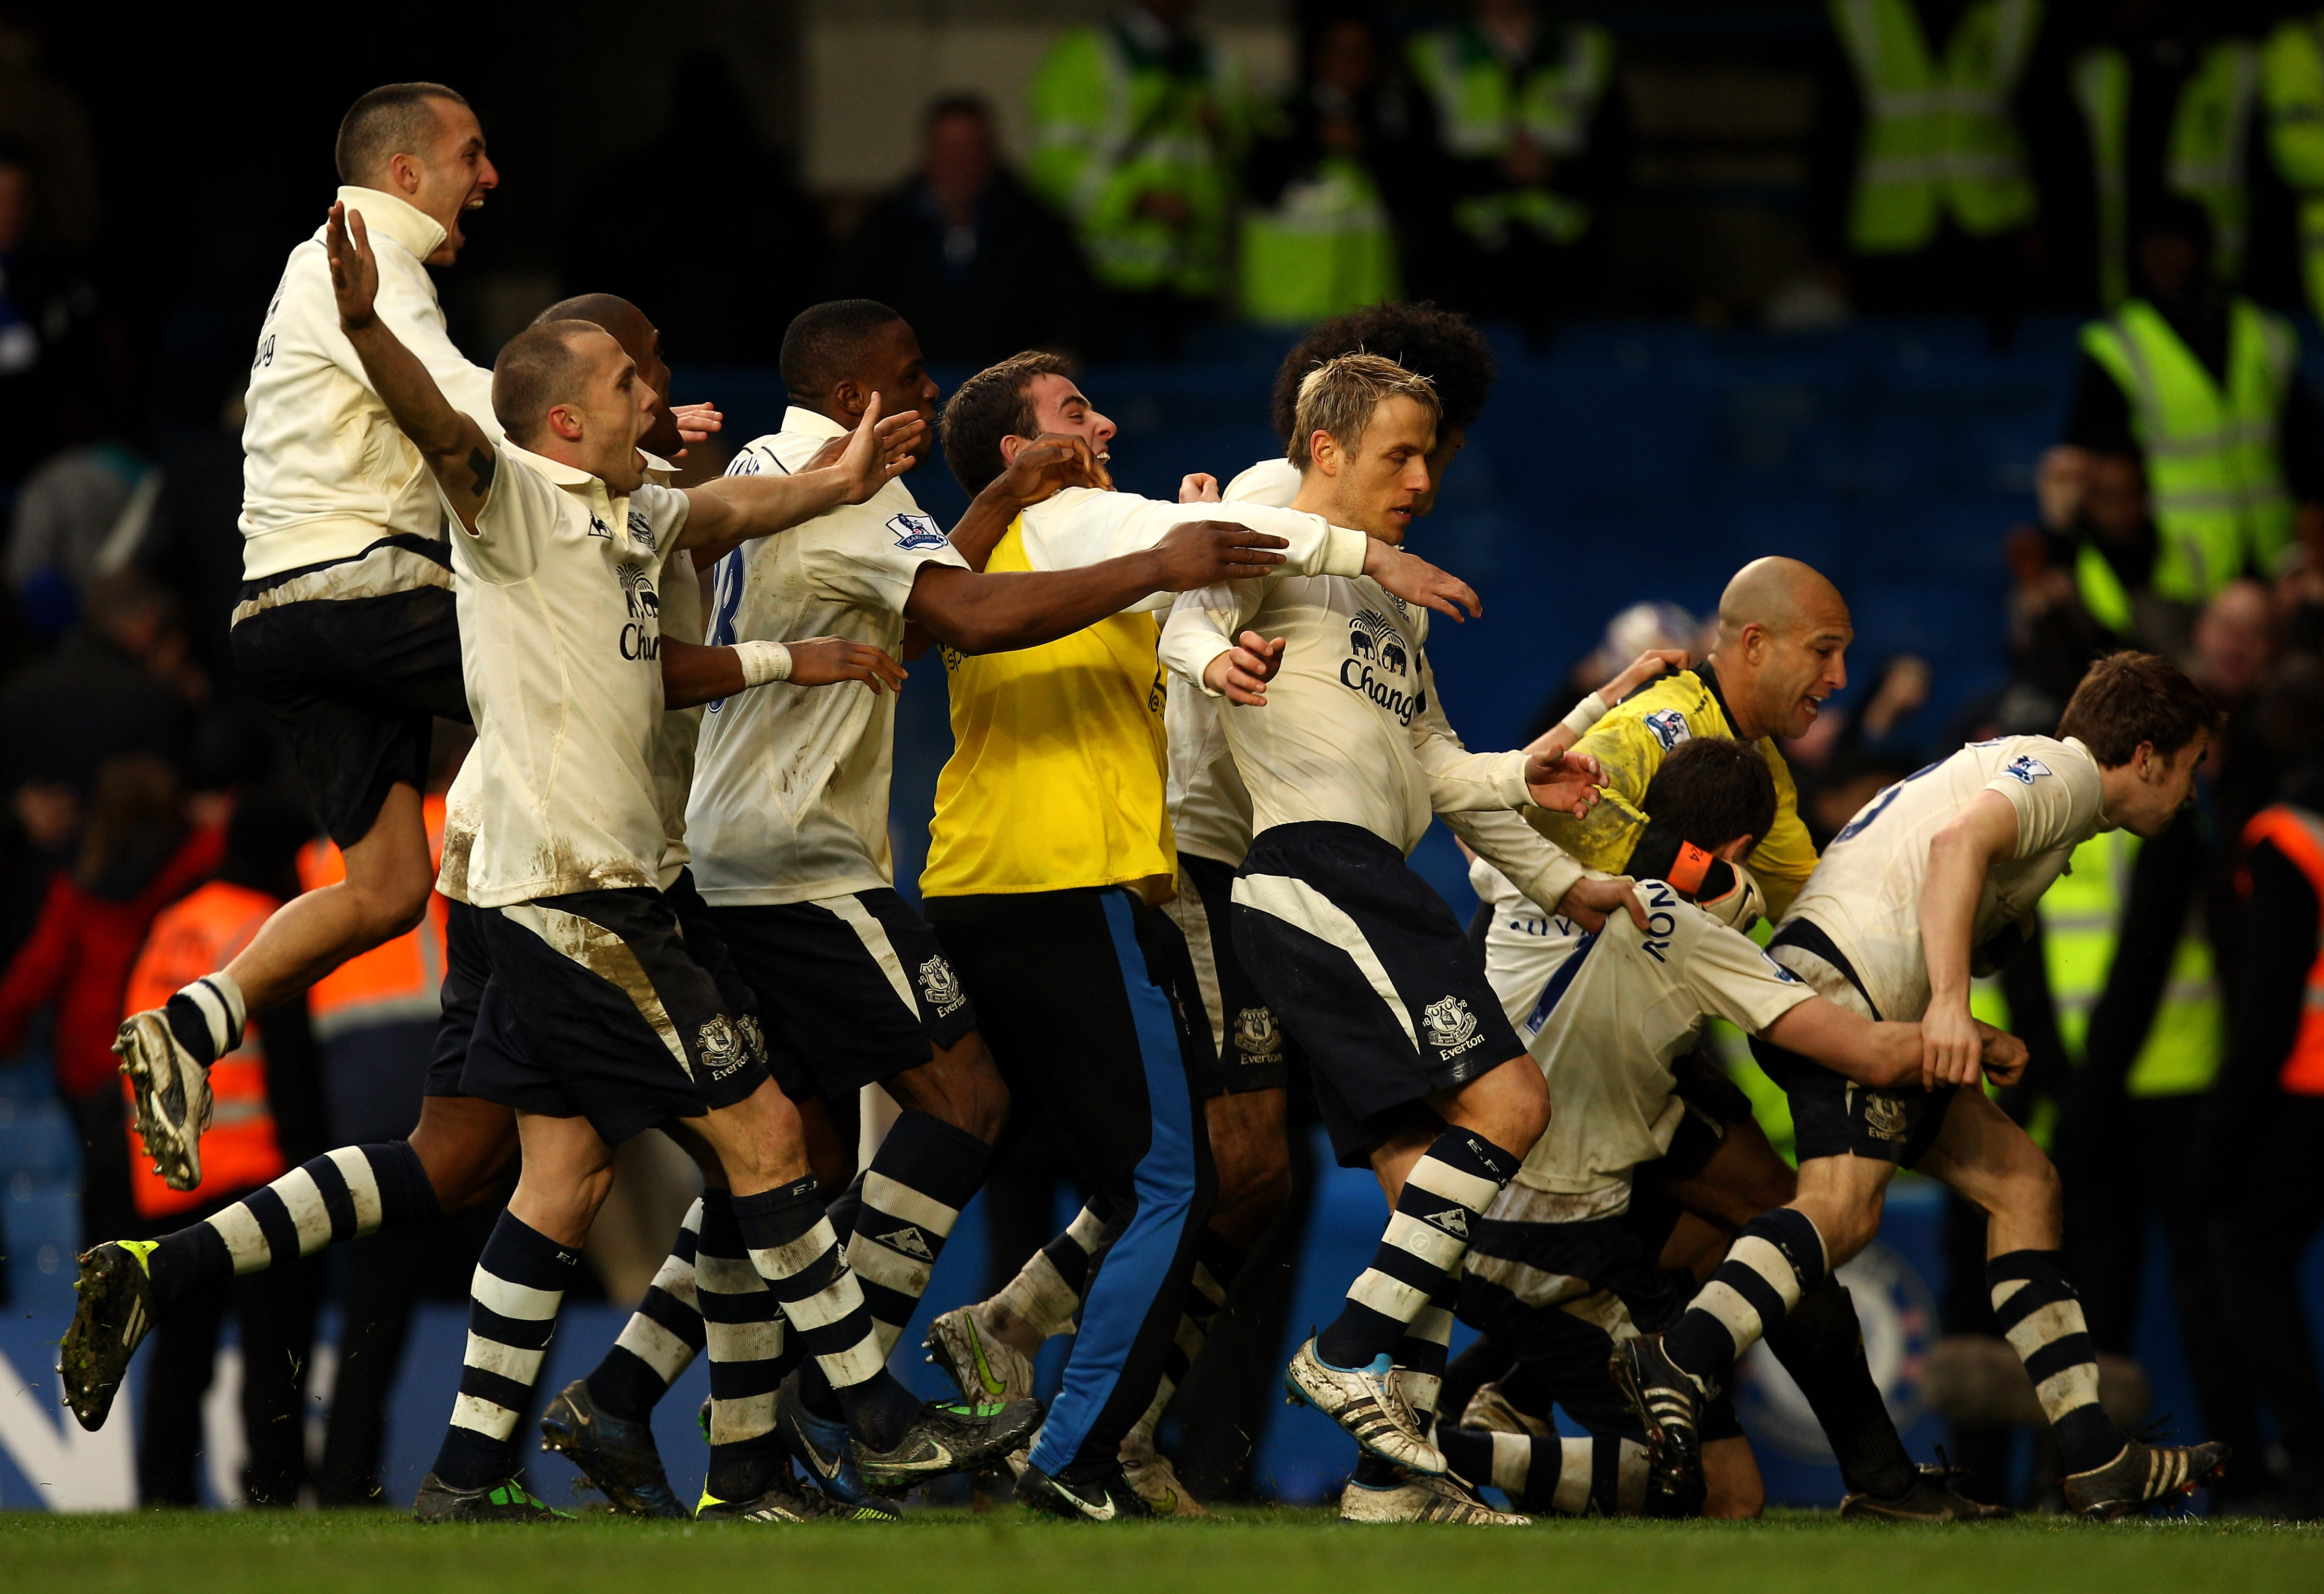 LONDON, ENGLAND - FEBRUARY 19:  Everton captain Phil Neville (C) celebrates with teammates after scoring the winning penalty to put his team through 4-3 on penalties during the FA Cup sponsored by E.ON 4th round replay match between Chelsea and Everton at